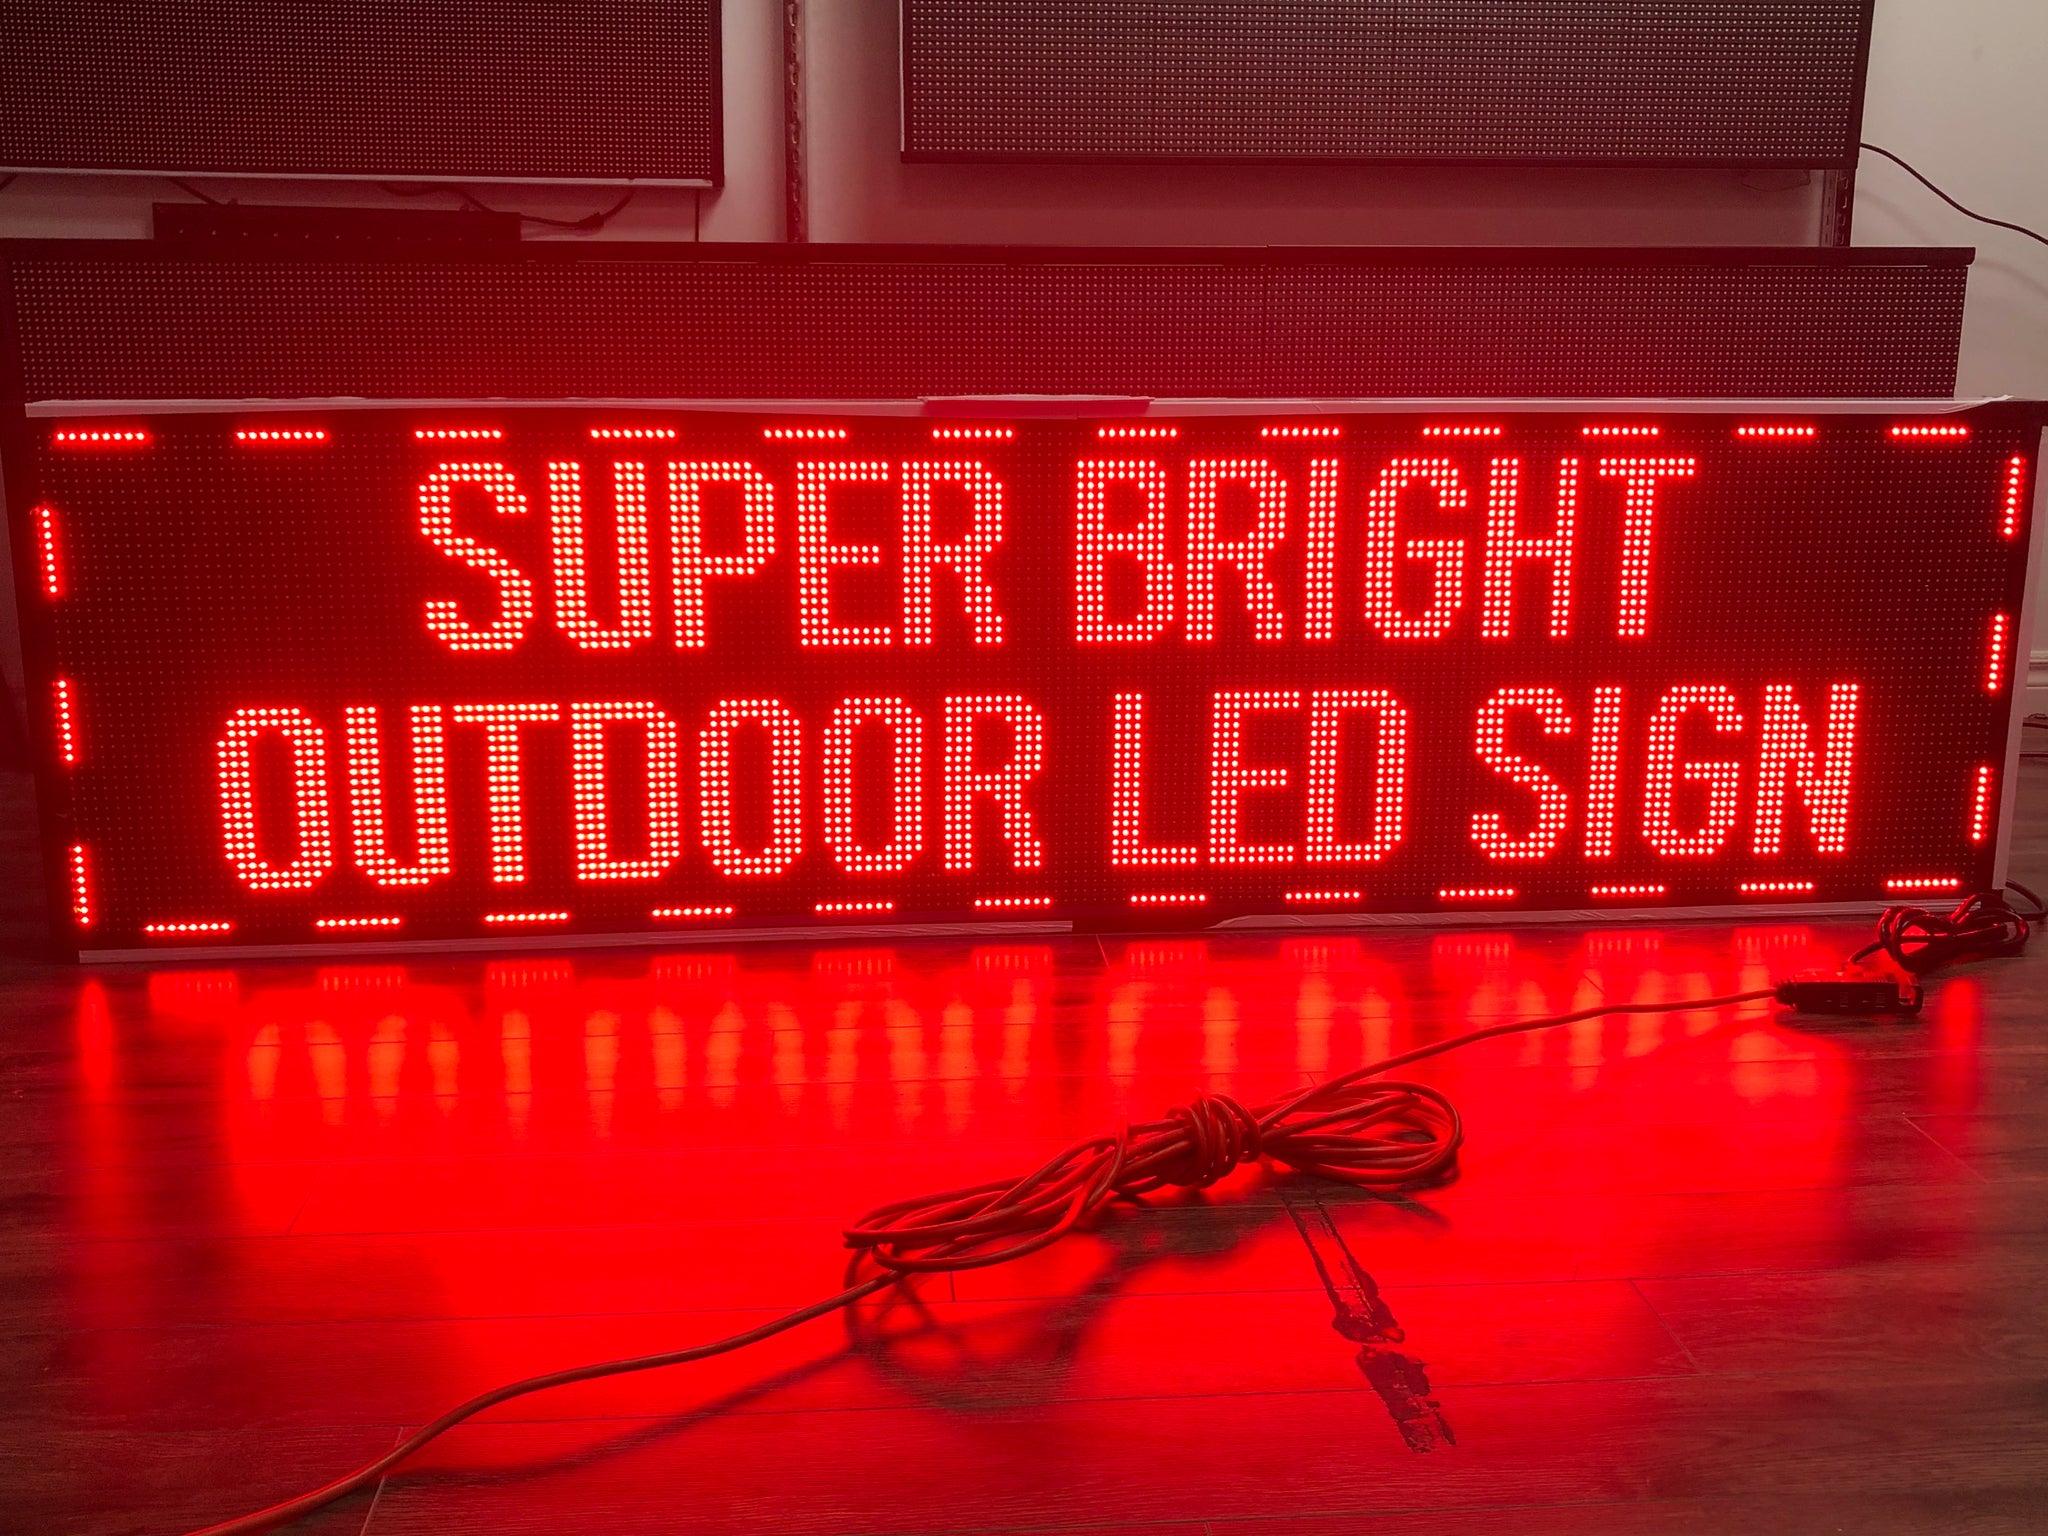 21 x 65 inch Ultra-bright Red Color Programmable LED Sign Water and Weather Proof for Outdoor Use